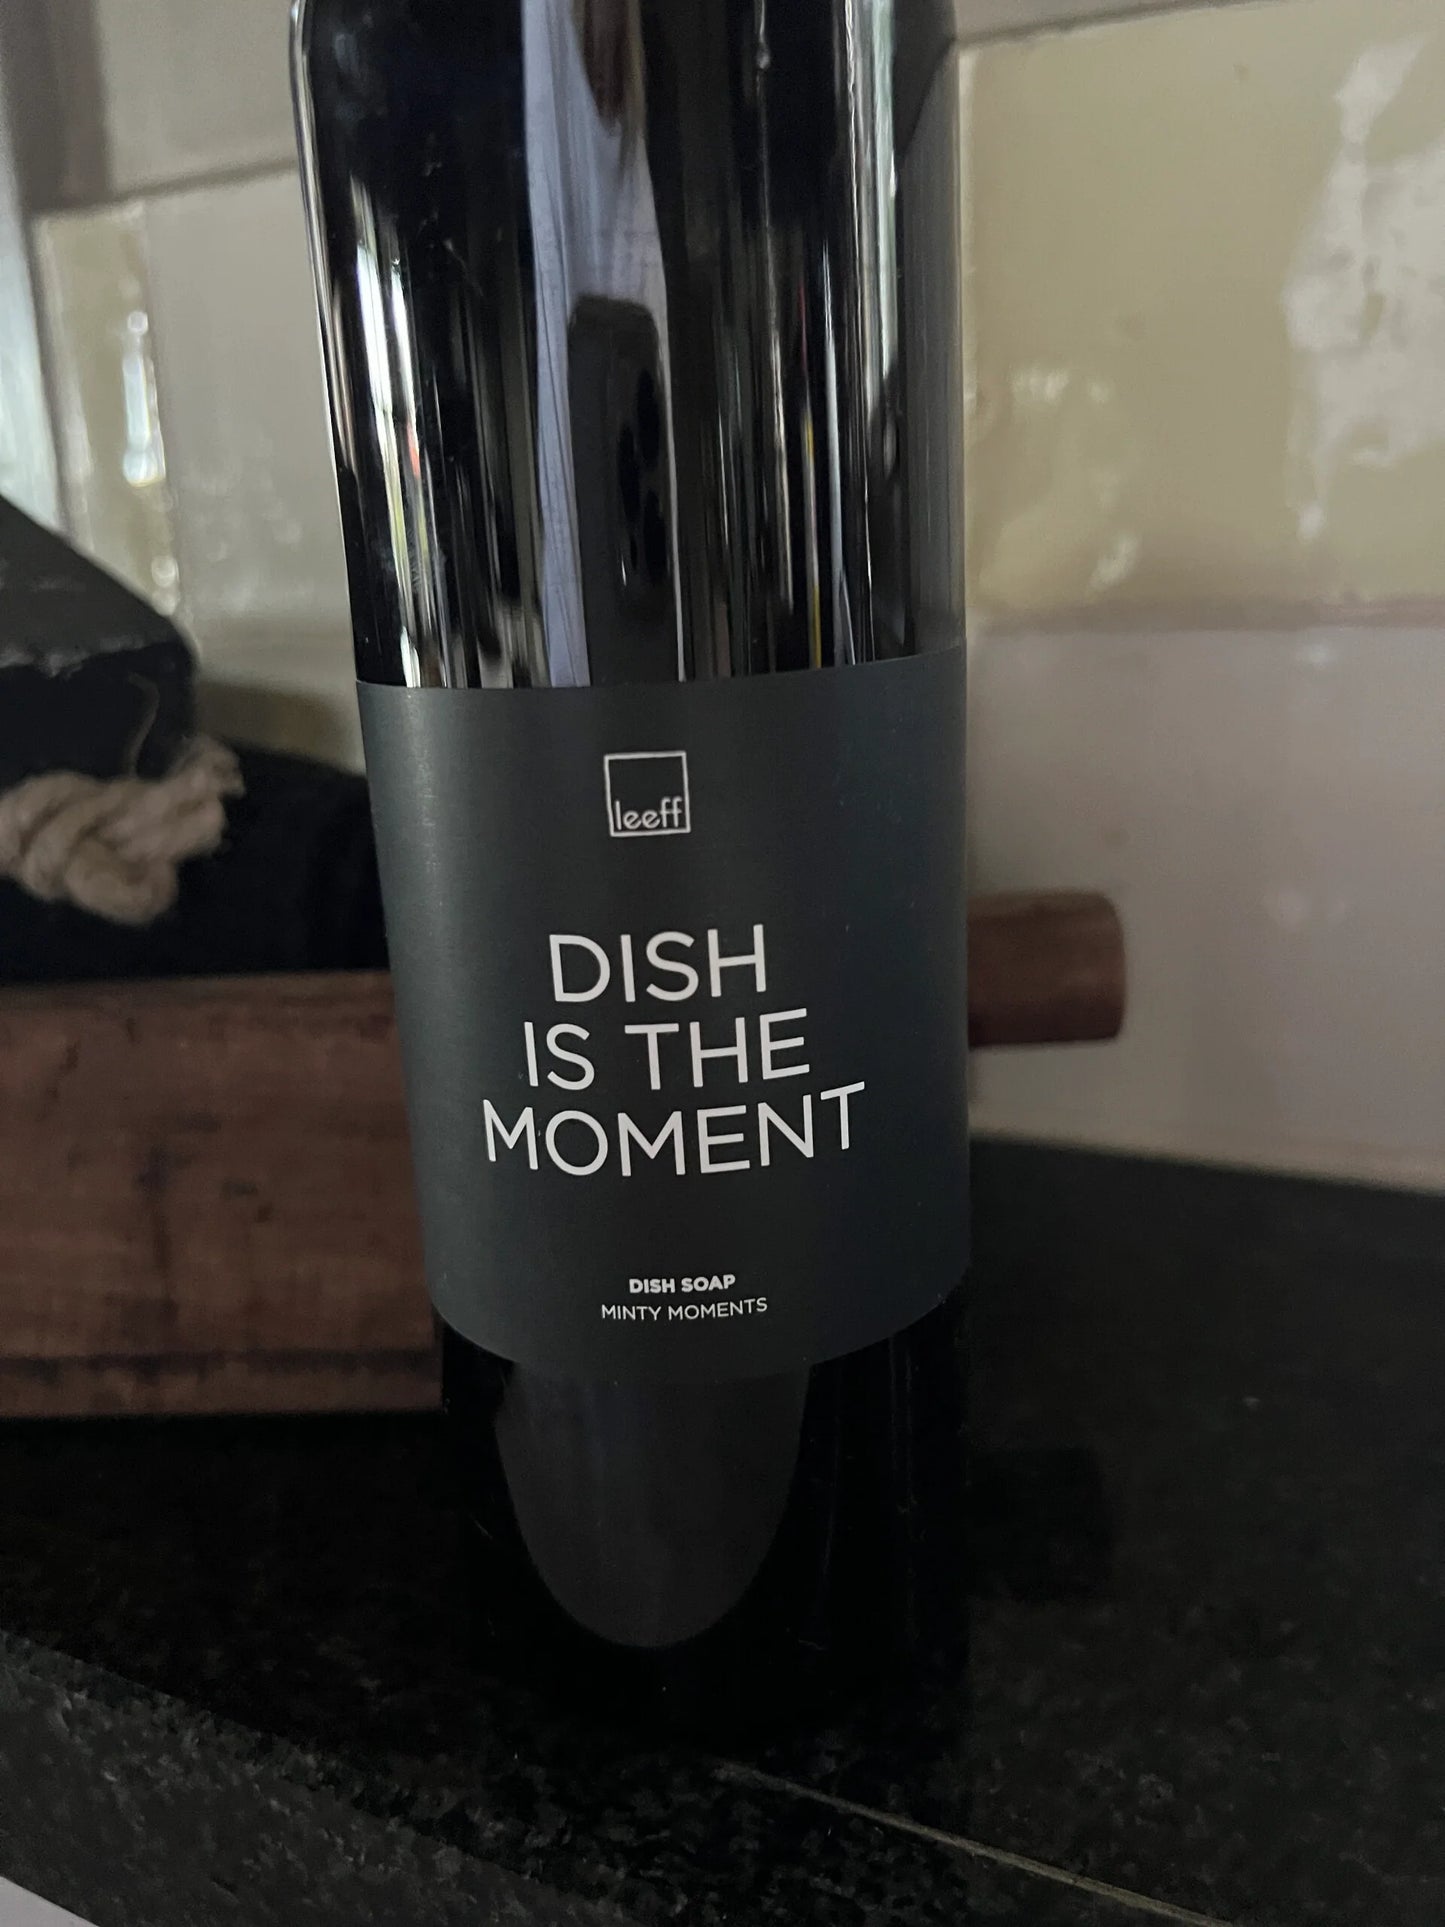 Washing up liquid "Dish is the moment"